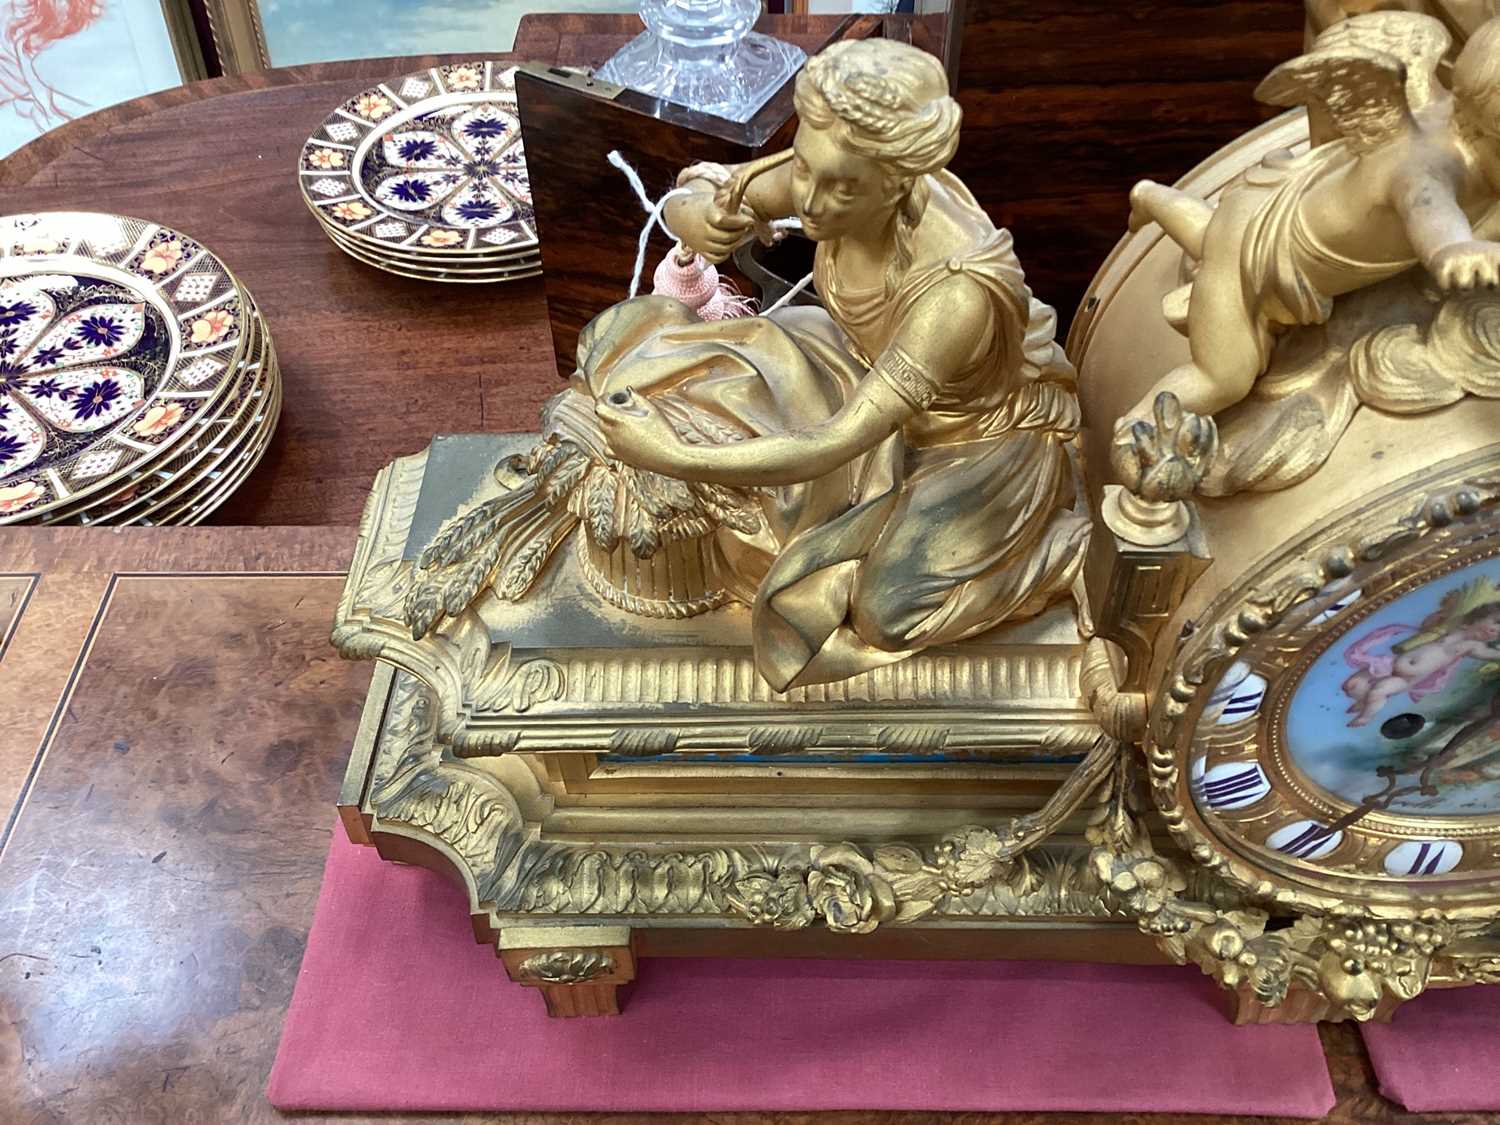 Fine quality large 19th century French ormolu clock garniture by Lerolle à Paris with Sèvres porcela - Image 4 of 26